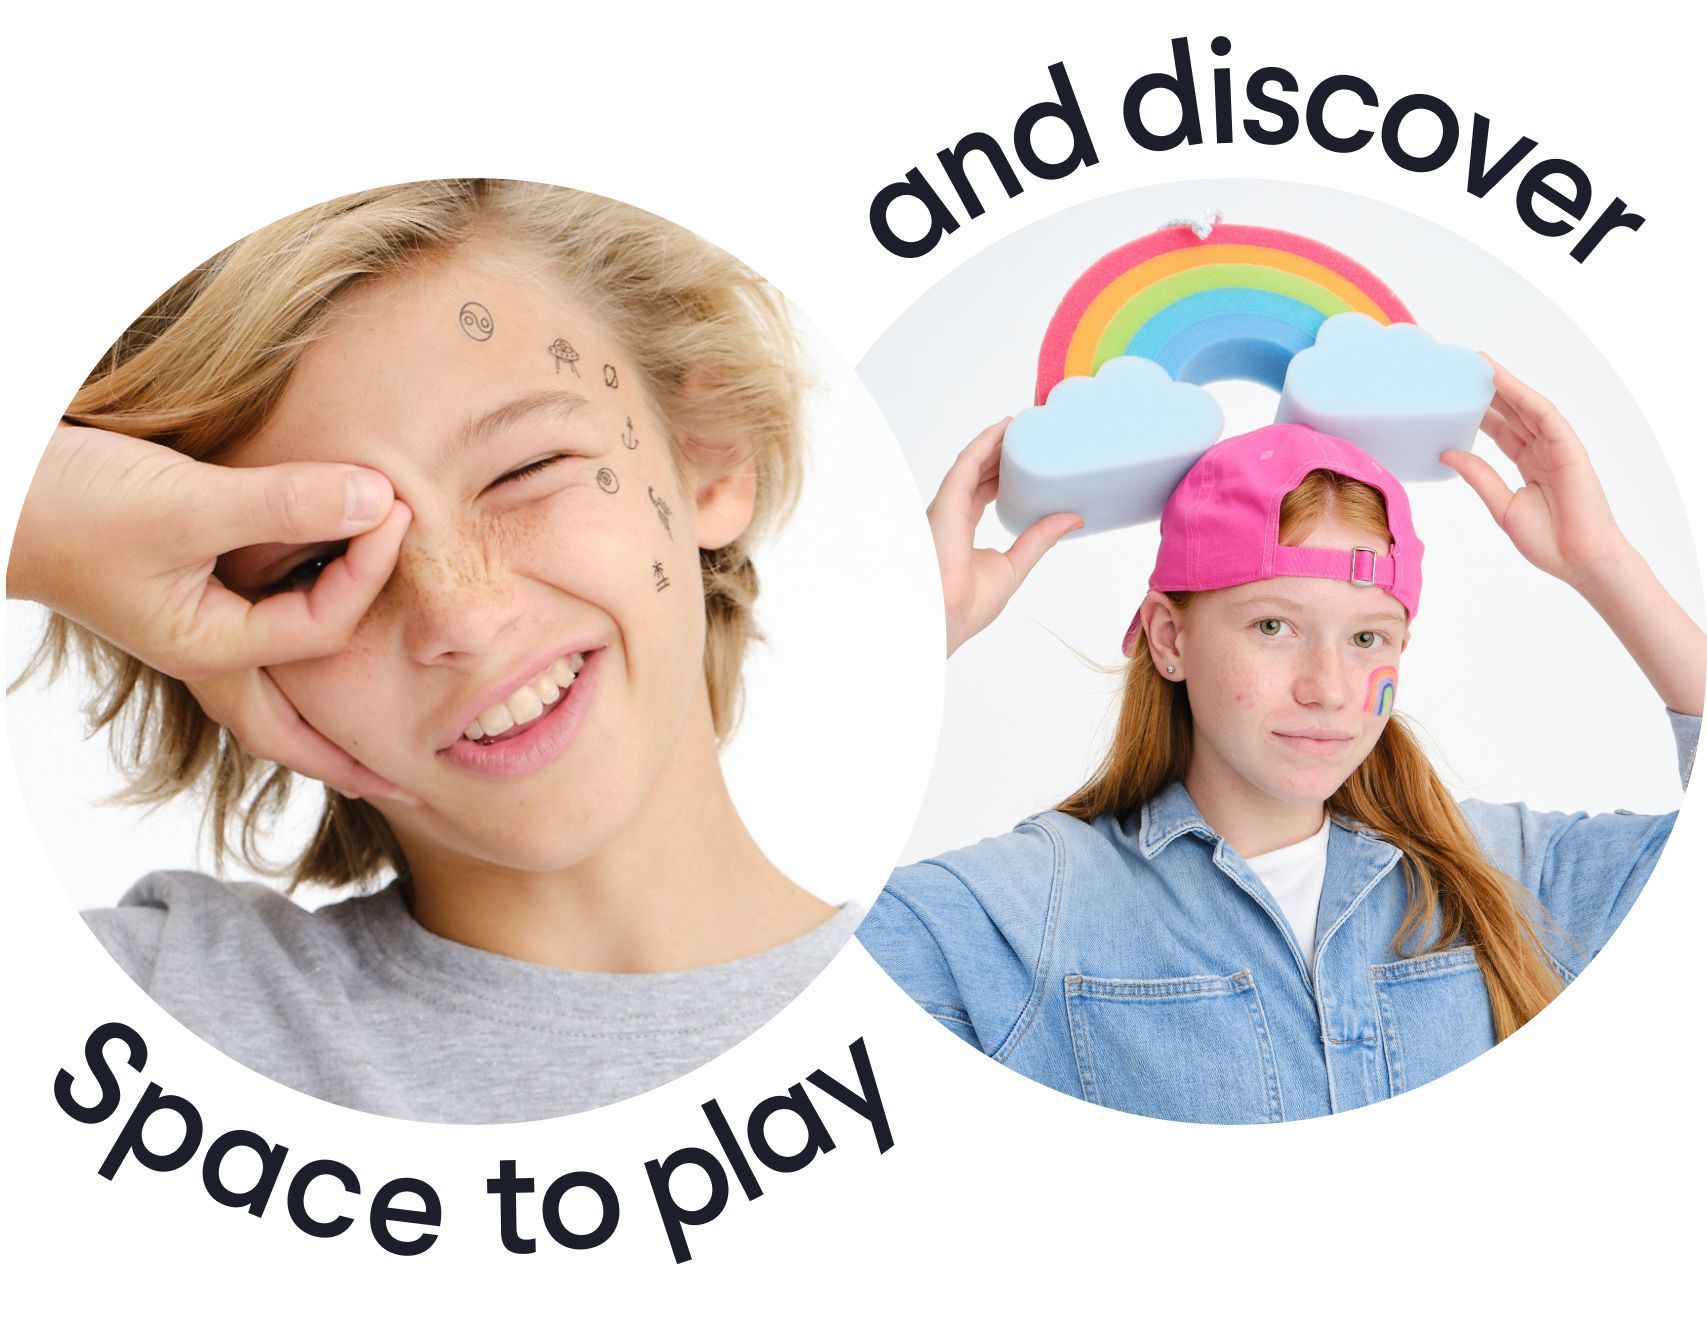 Space to play and discover